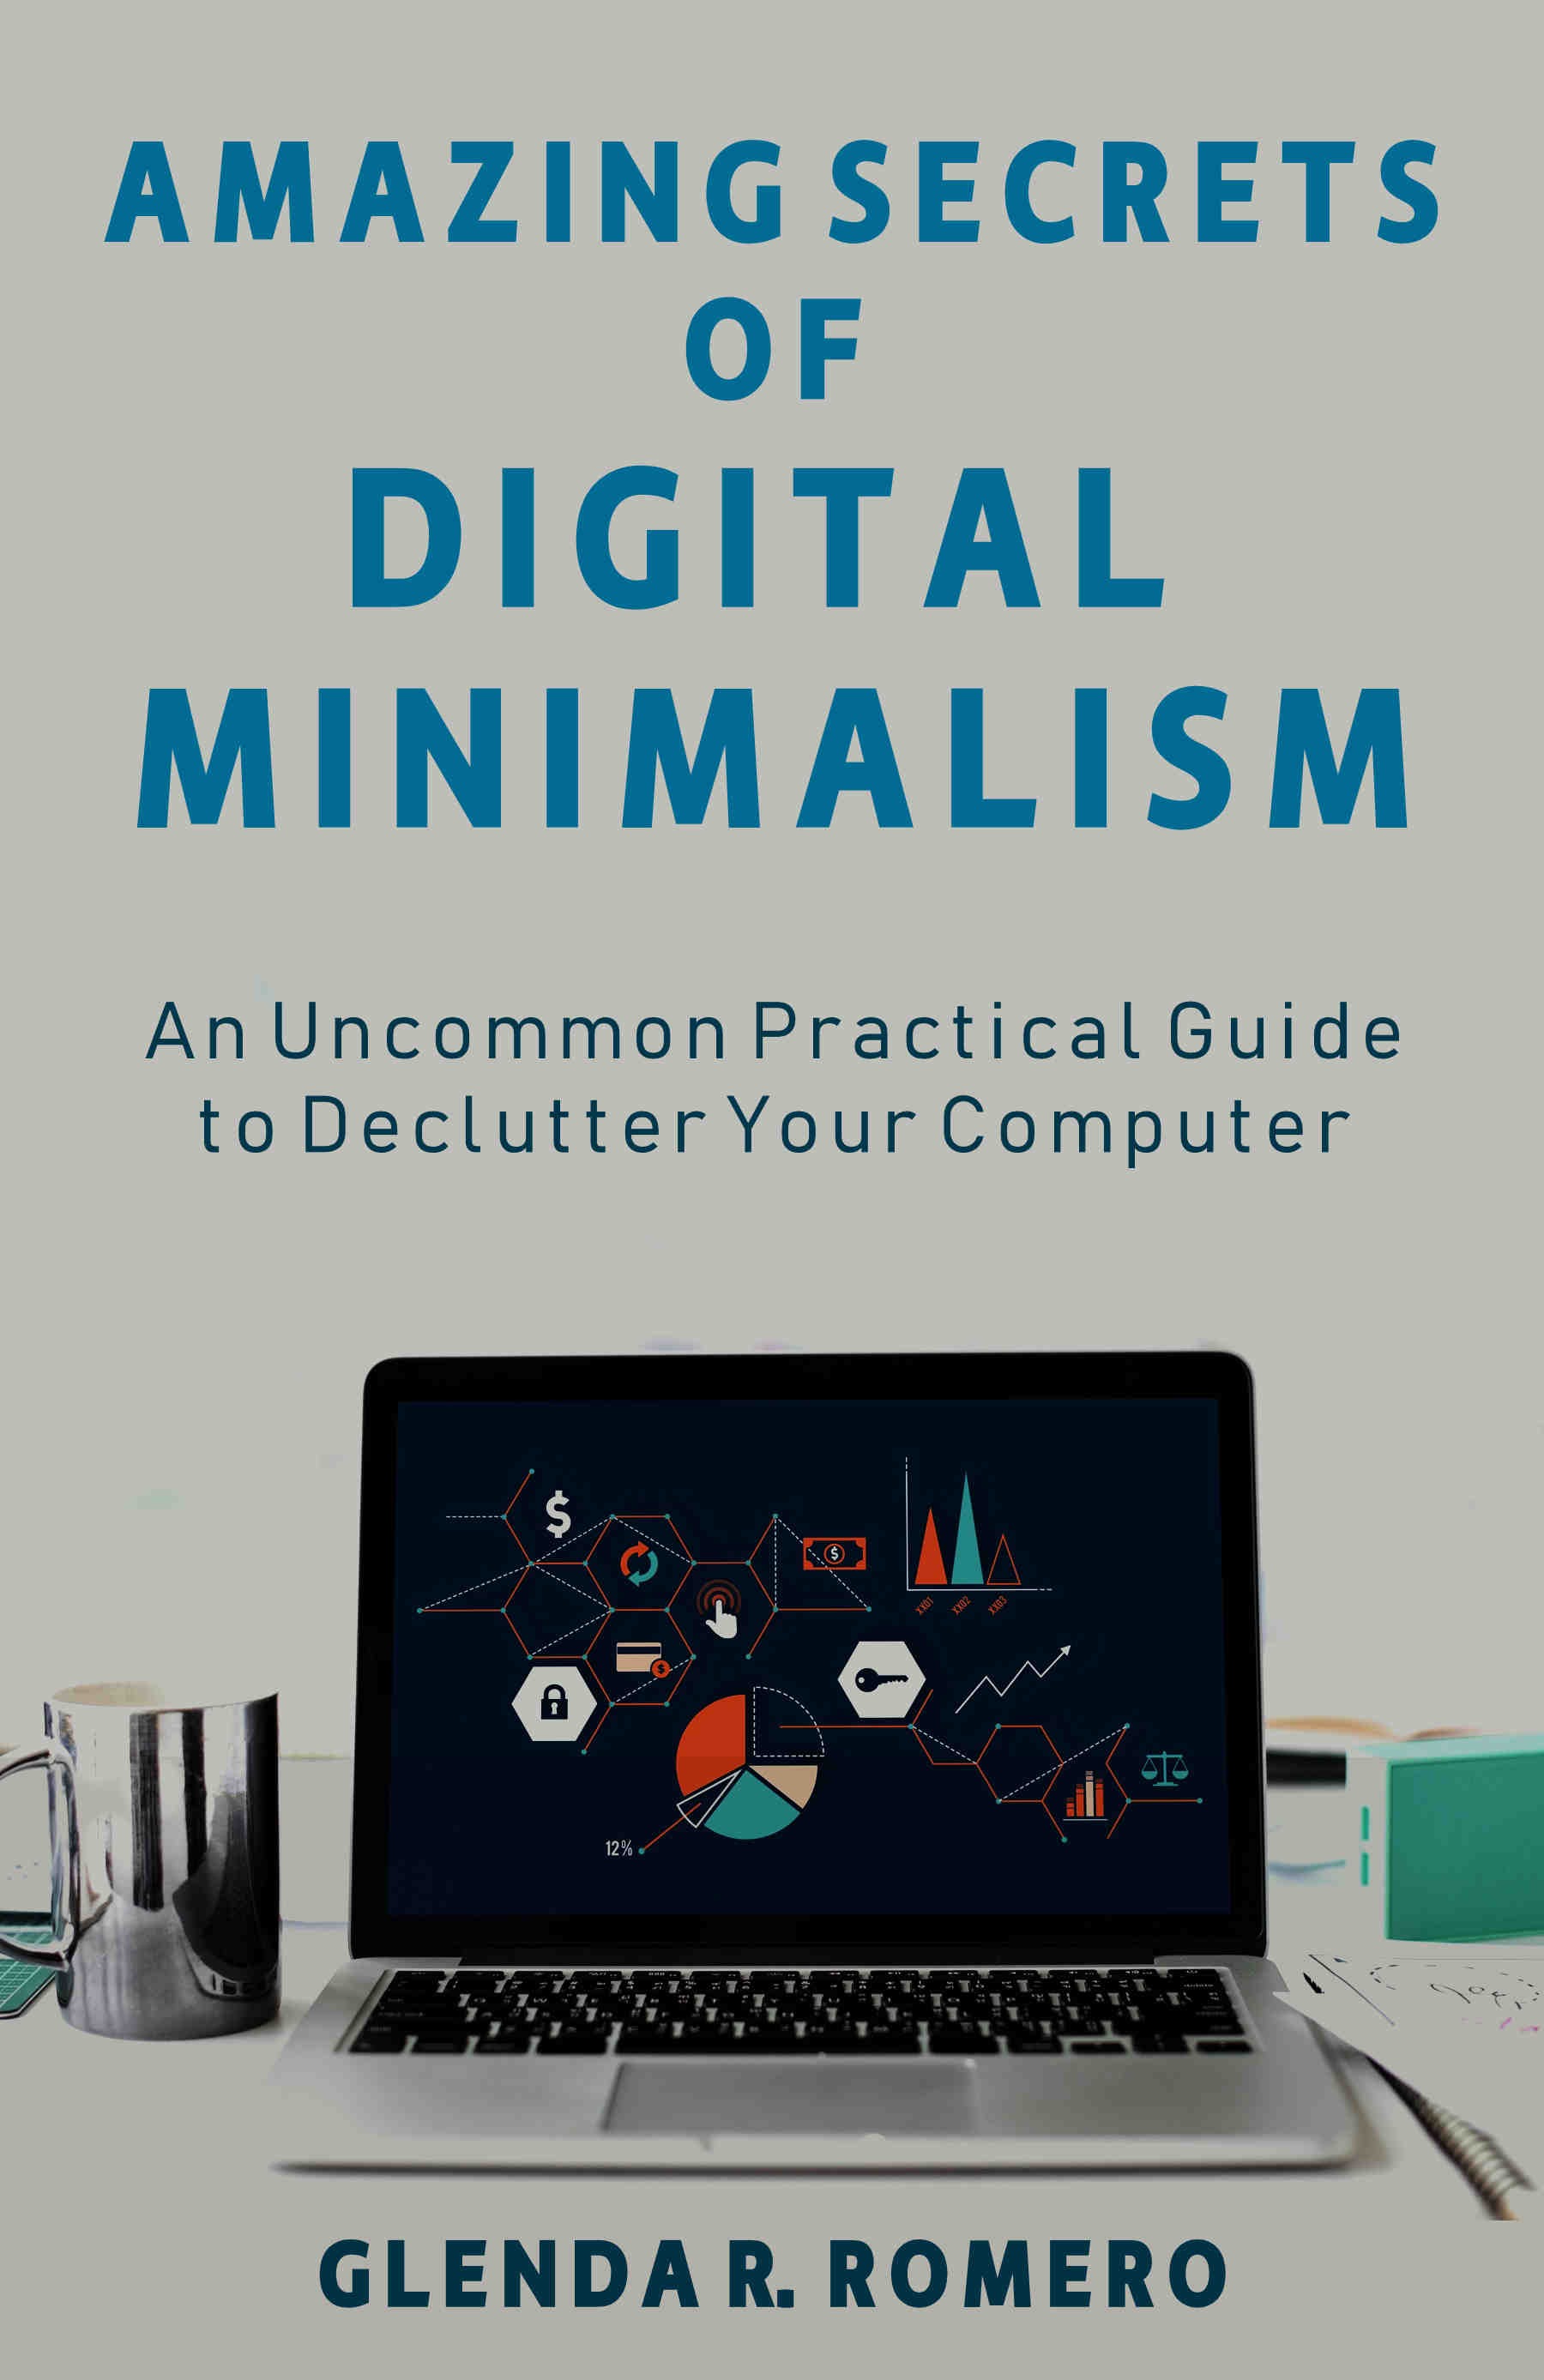 FREE: Amazing Secrets of Digital Minimalism: An Uncommon Practical Guide to Declutter Your Computer by Glenda R. Romero